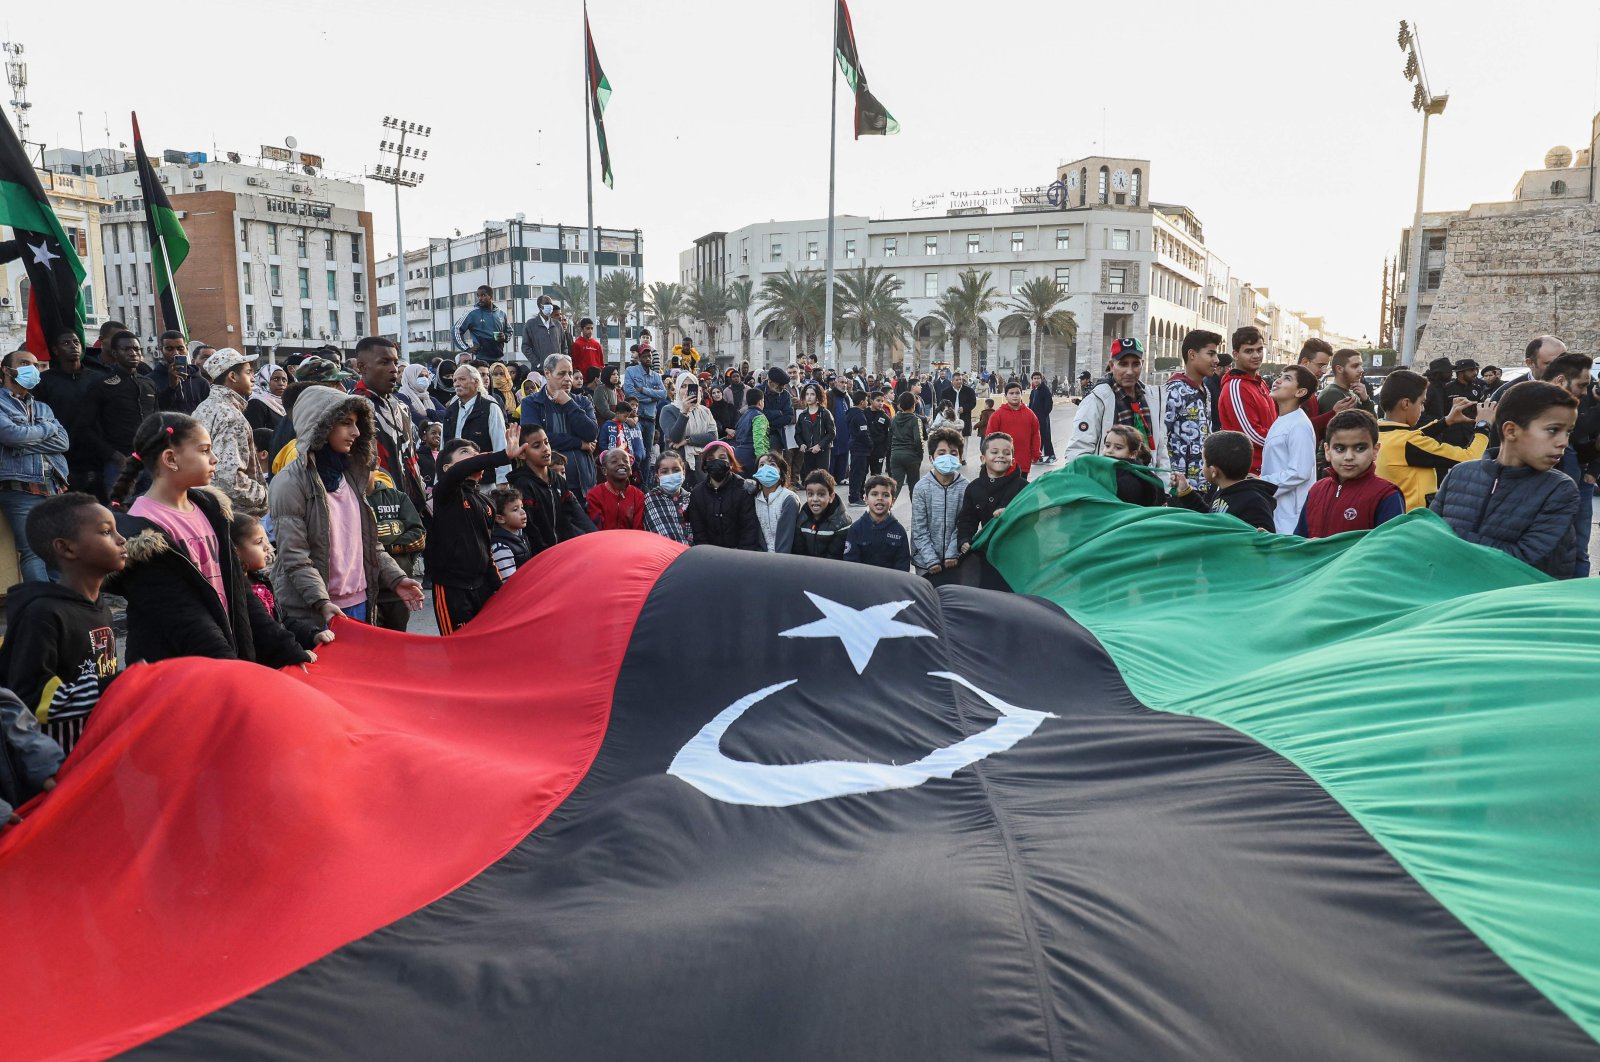 Children wave a giant Libyan national flag as people gather at Martyrs' Square in the center of the capital Tripoli, Libya, Dec. 24, 2021. (AFP Photo)